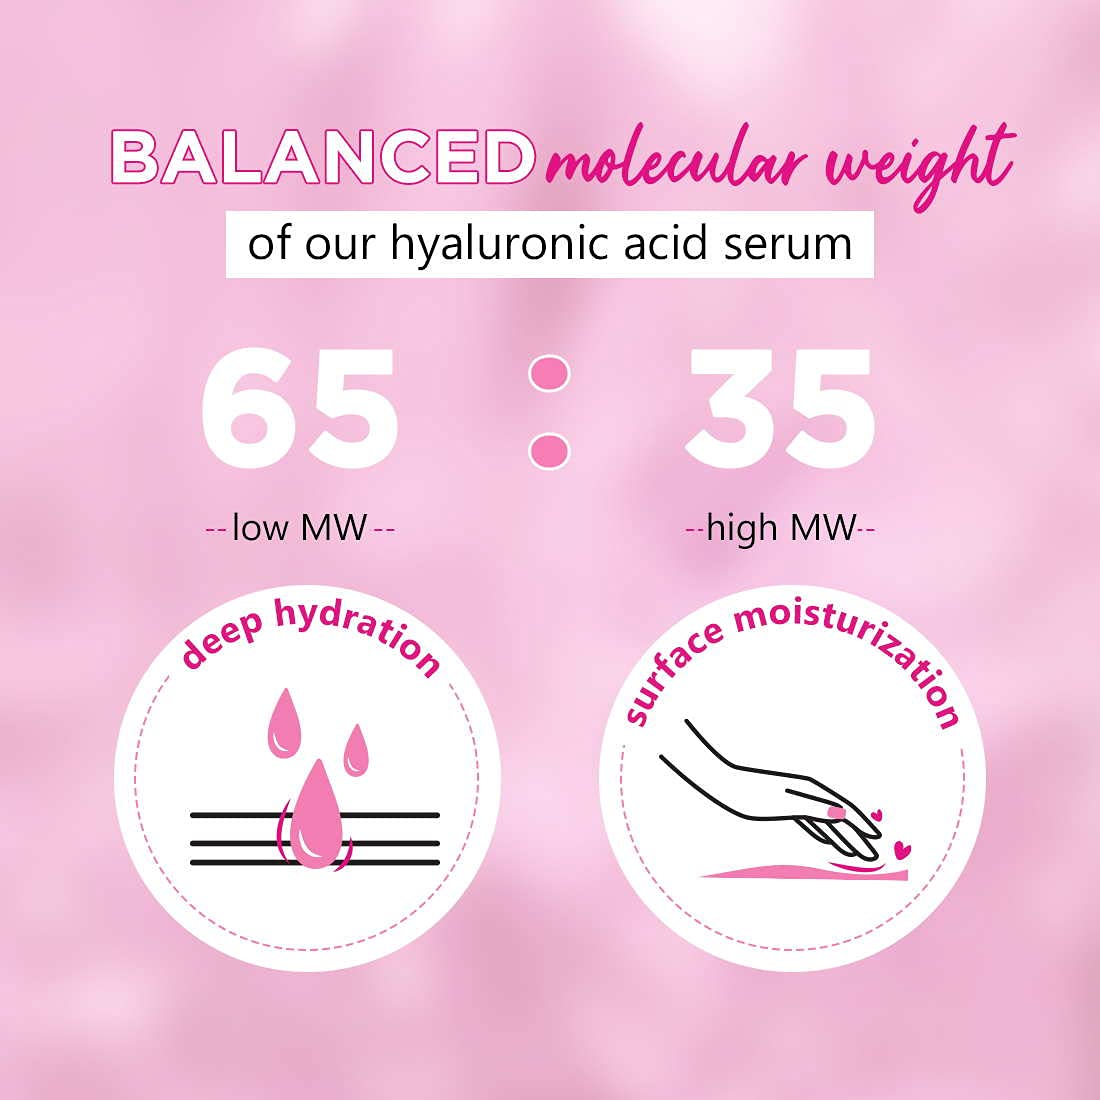 Plum 2% Hyaluronic Acid Serum with Bulgarian Rose (30 ml) | Instant Hydration for Plump & Bouncy Skin | Daily Use Face Serum| For All Skin Types | Fragrance-Free  from Plum